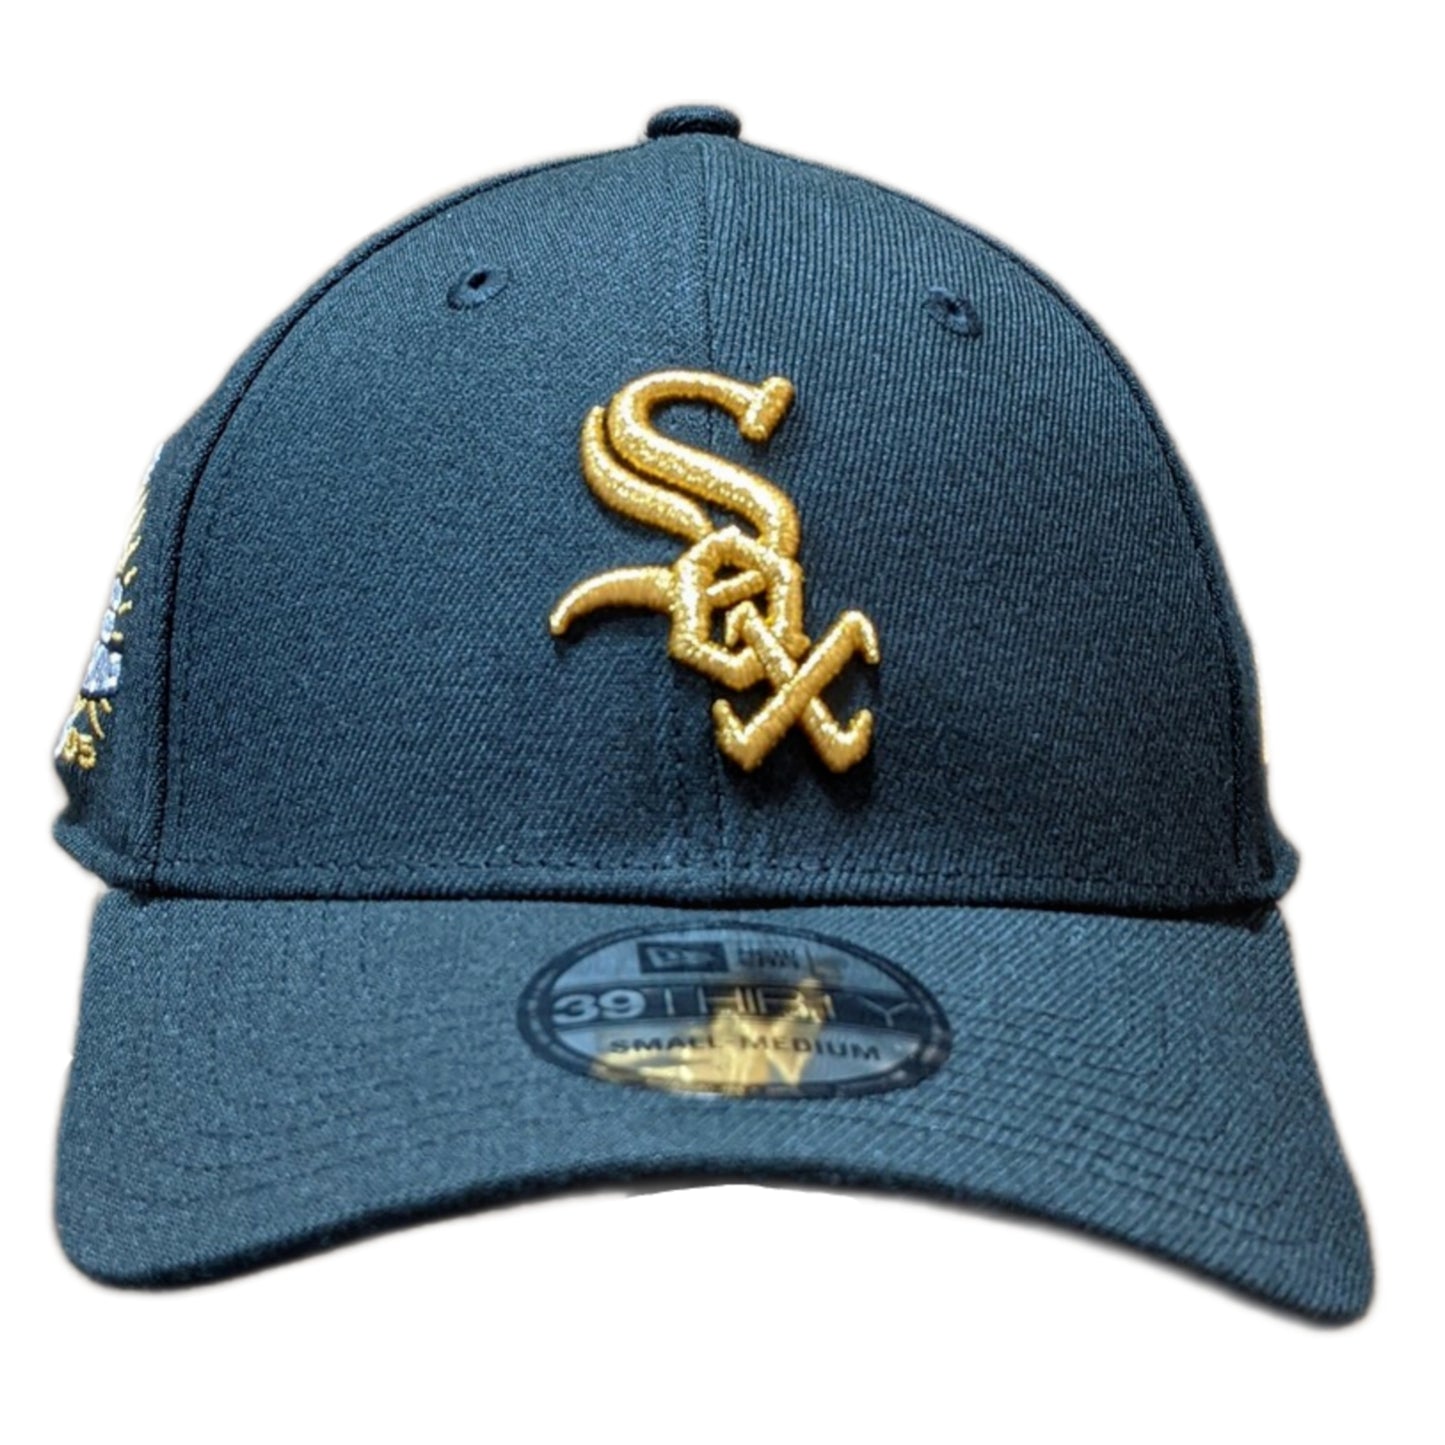 Chicago White Sox 2005 World Series Champions Cooperstown Collection Gold Rush 39THIRTY Flex Fit New Era Hat